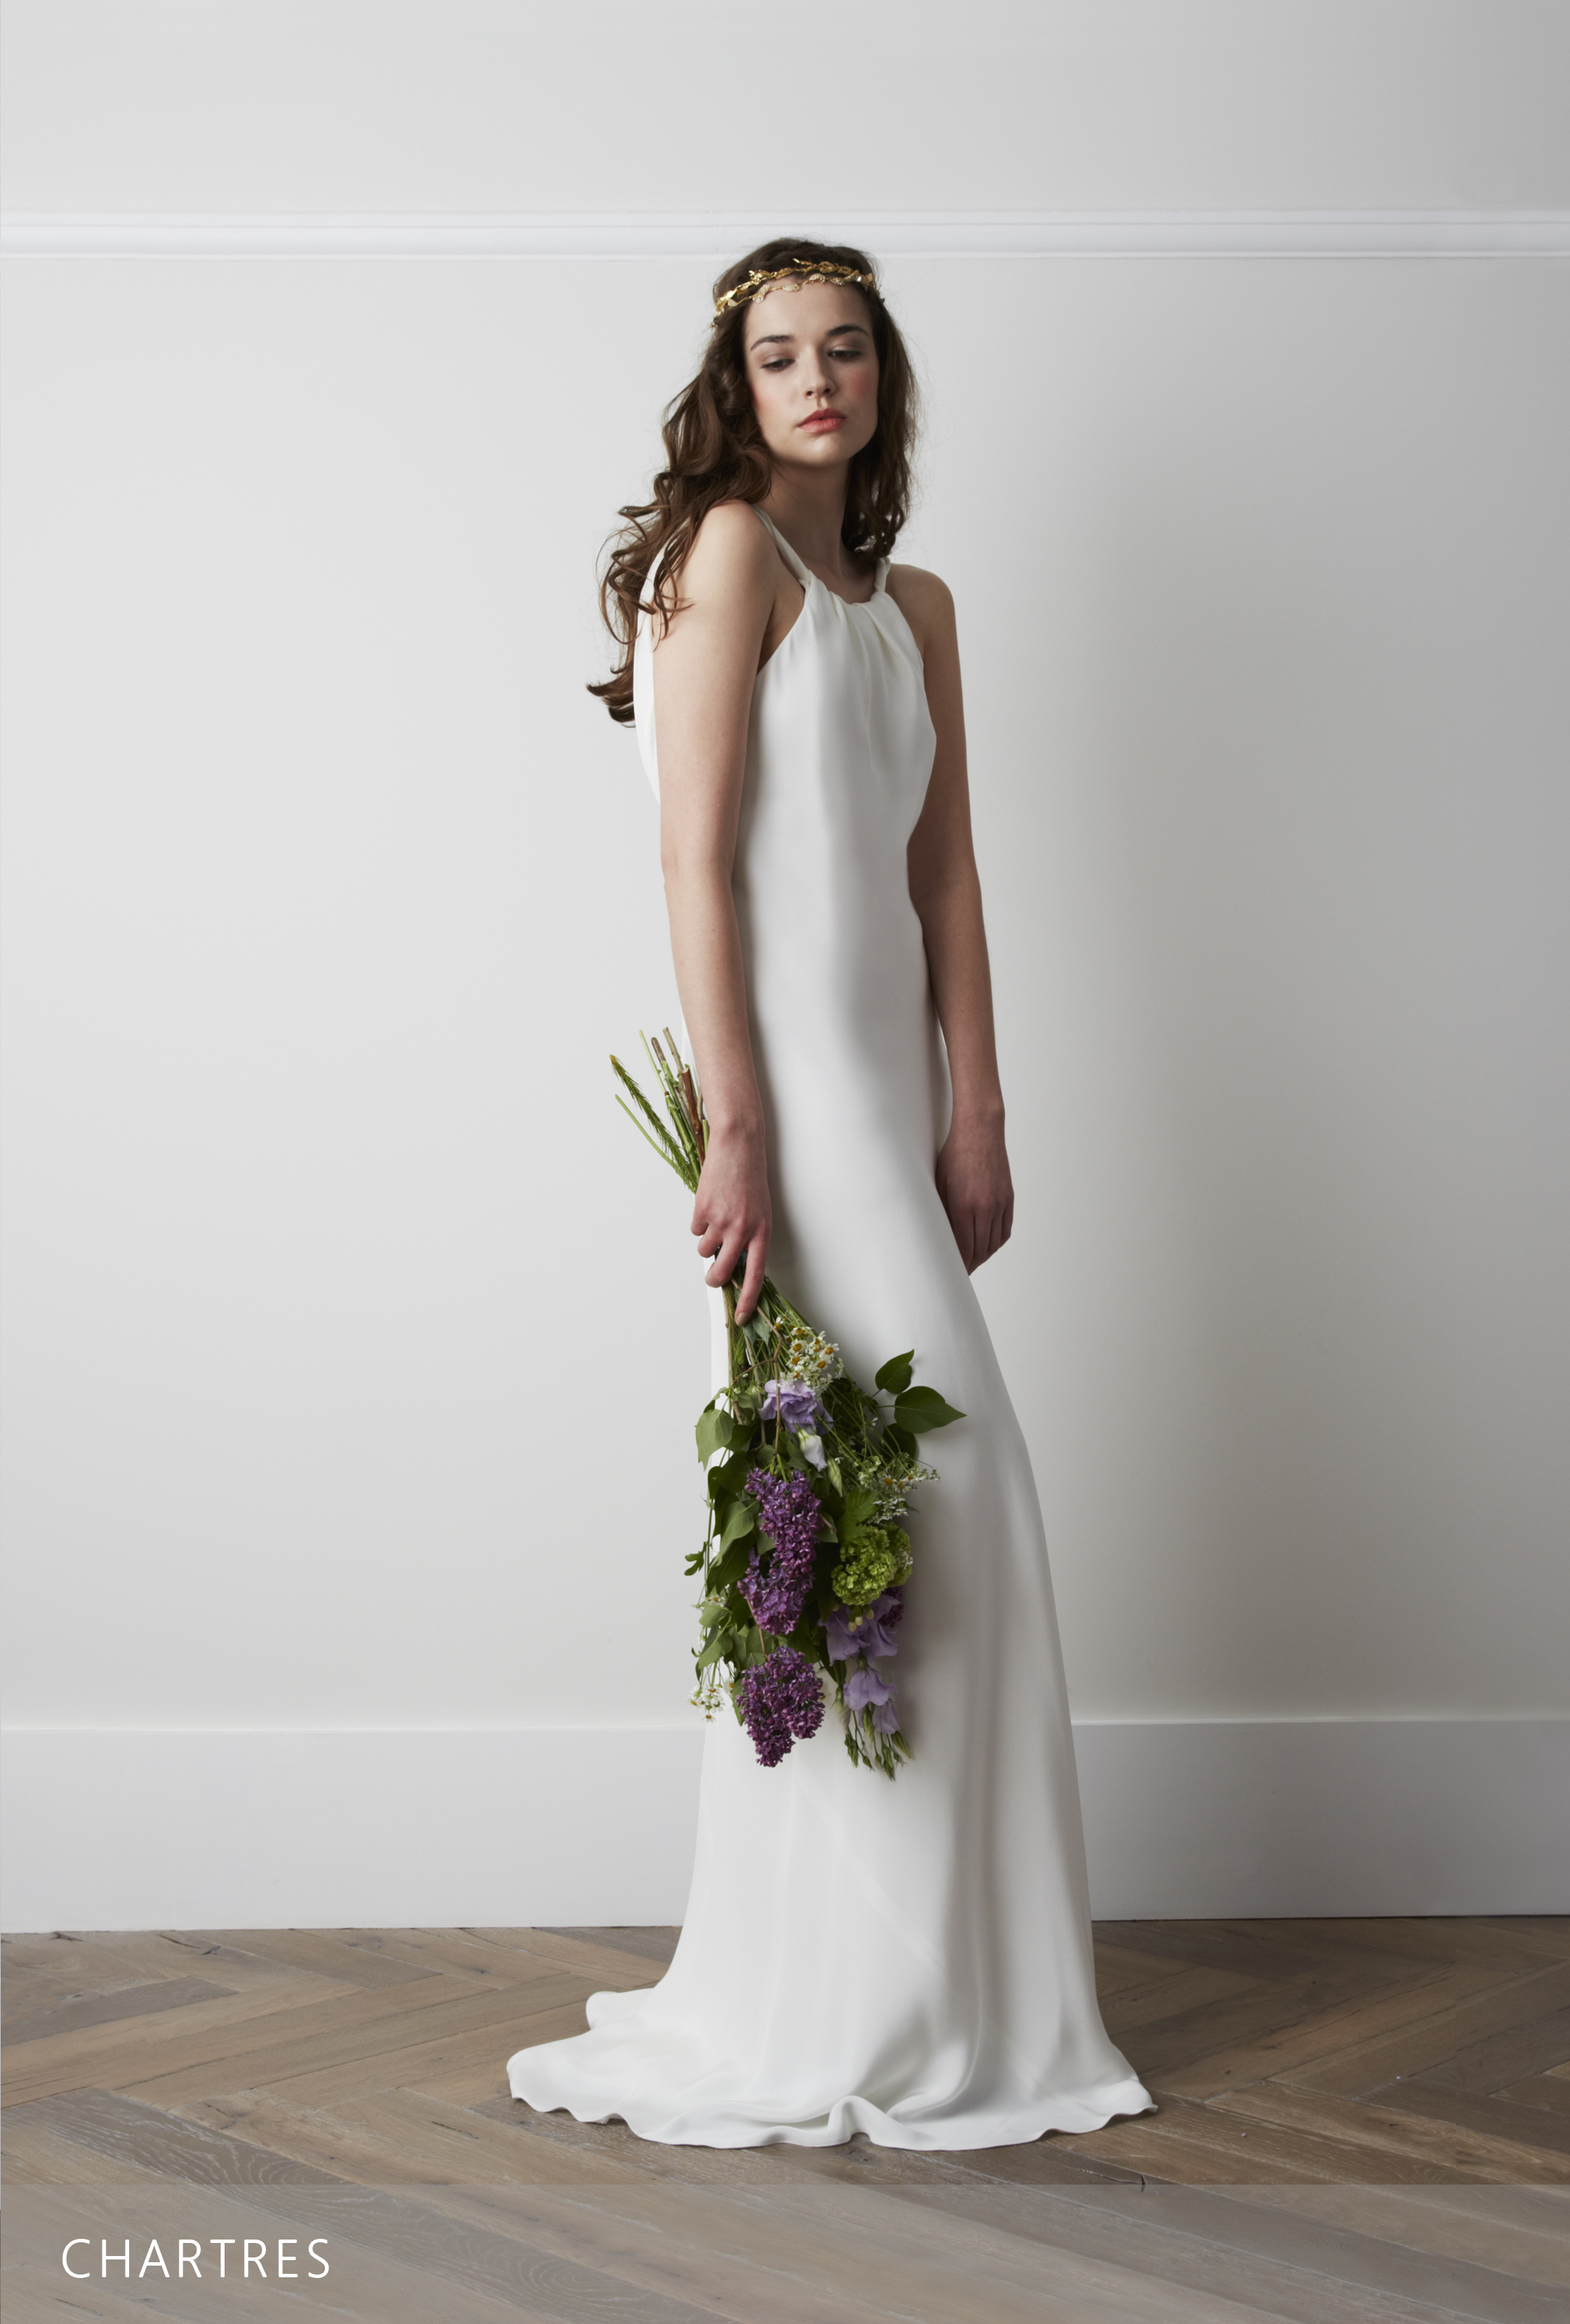 Chartres dress by Charlie Brear